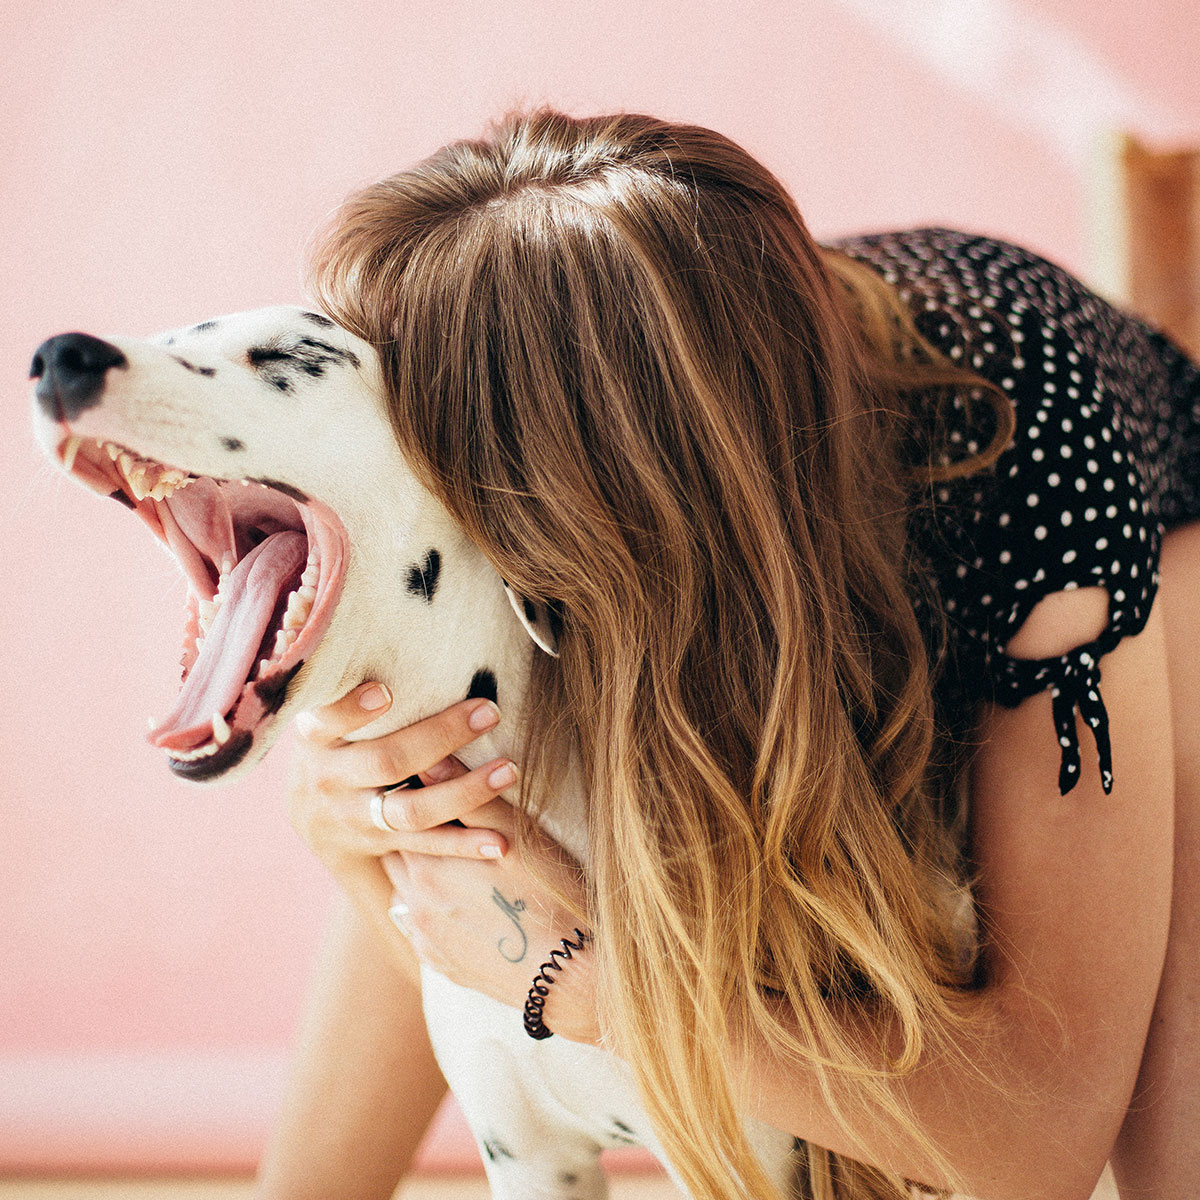 Woman hugging her dog while it yawns.